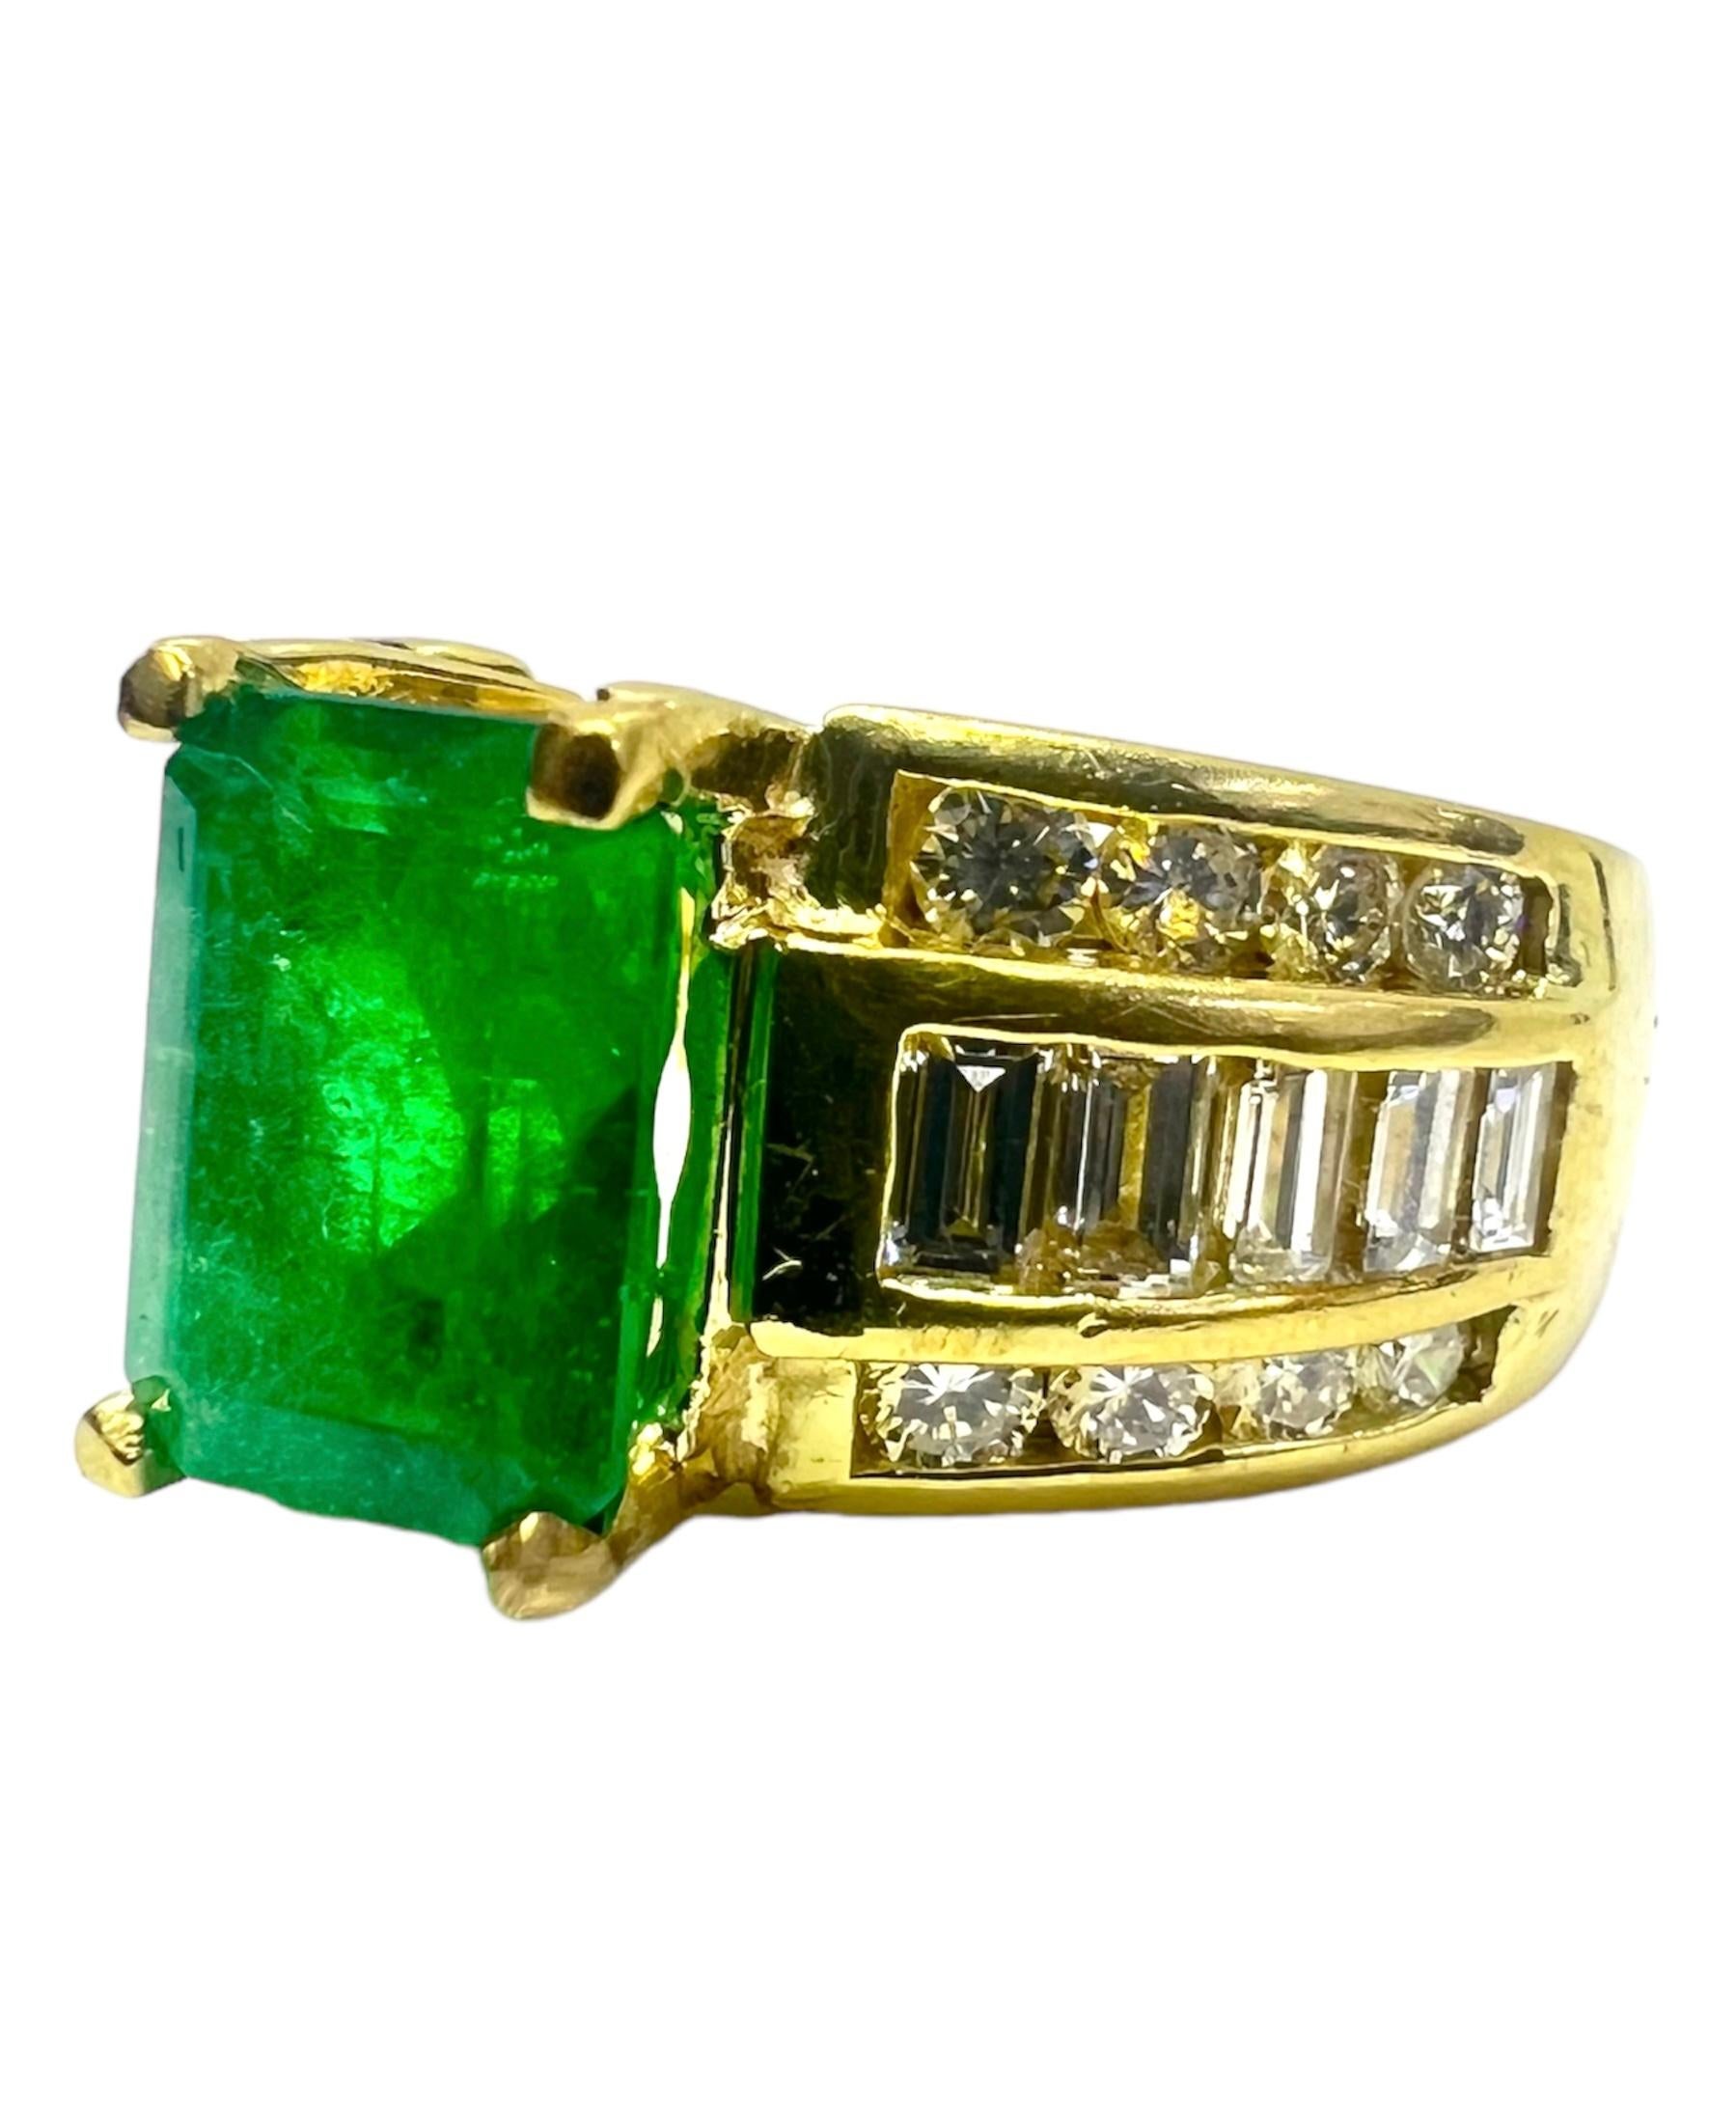 Yellow gold ring with 2.75 carat emerald center stone accented with diamonds.

Sophia D by Joseph Dardashti LTD has been known worldwide for 35 years and are inspired by classic Art Deco design that merges with modern manufacturing techniques.